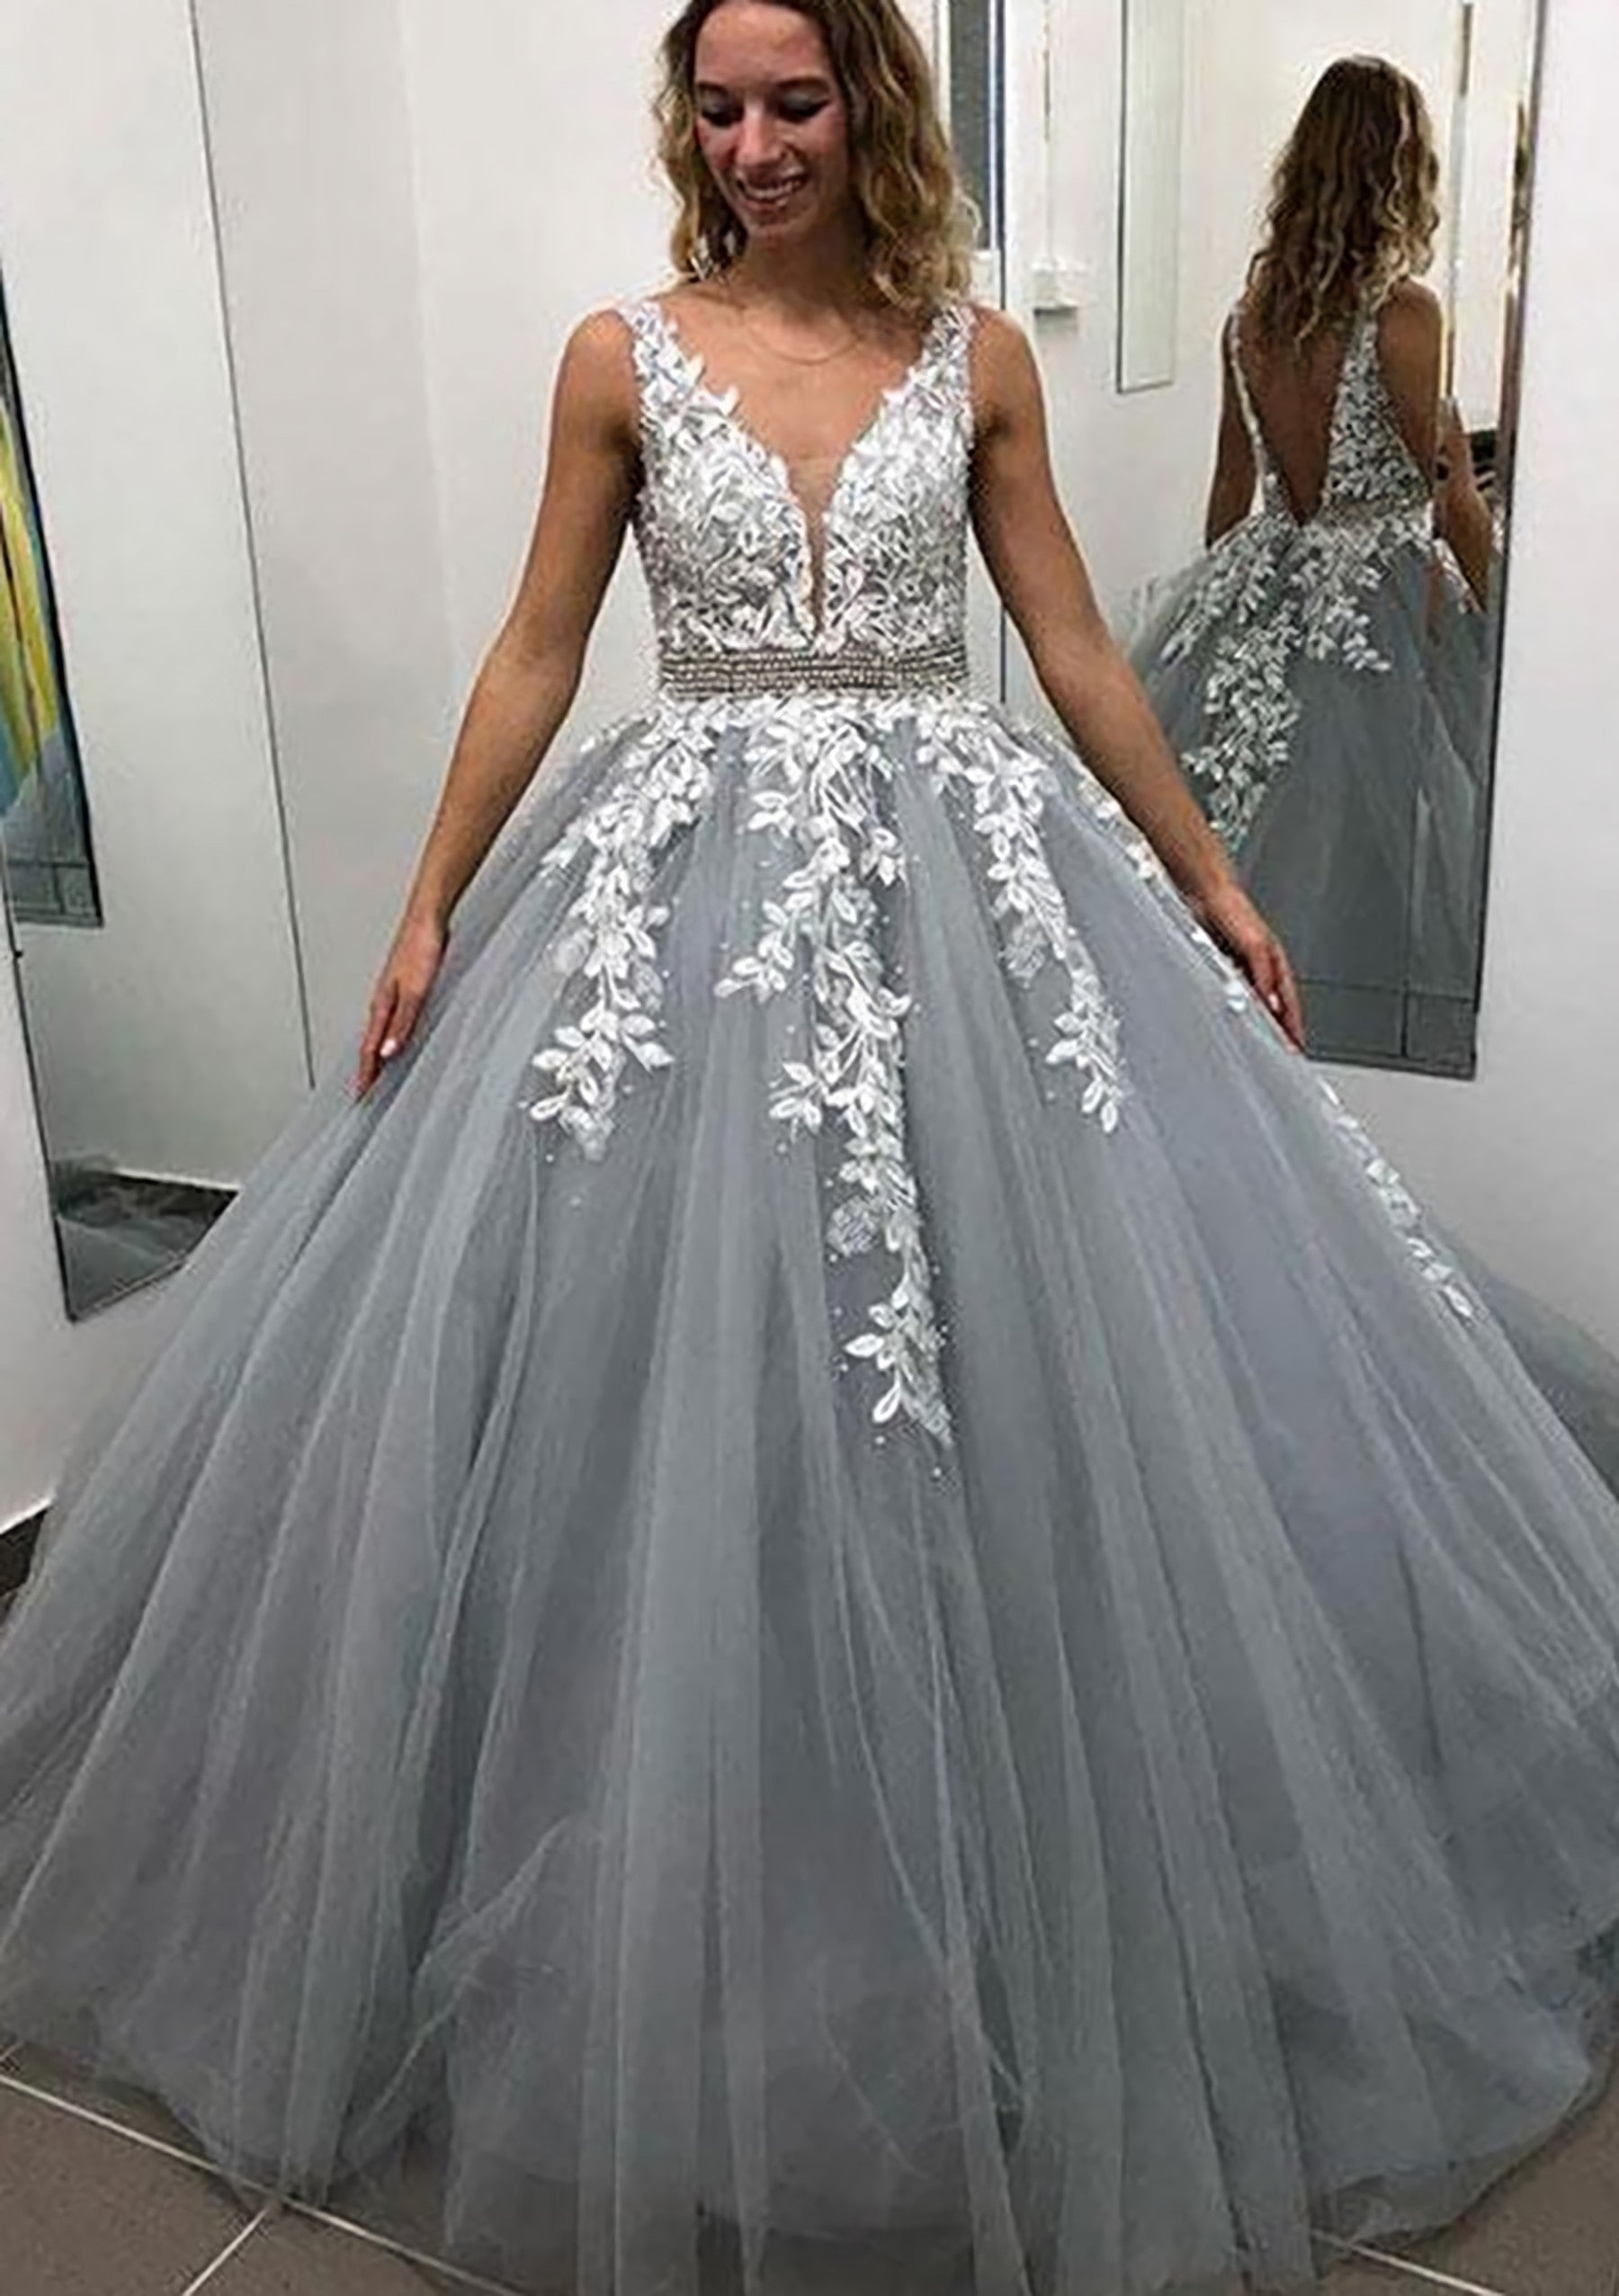 Formal Dress For Wedding Reception, Ball Gown Sleeveless Long/Floor-Length Tulle Prom Dress With Lace Appliqued Beading